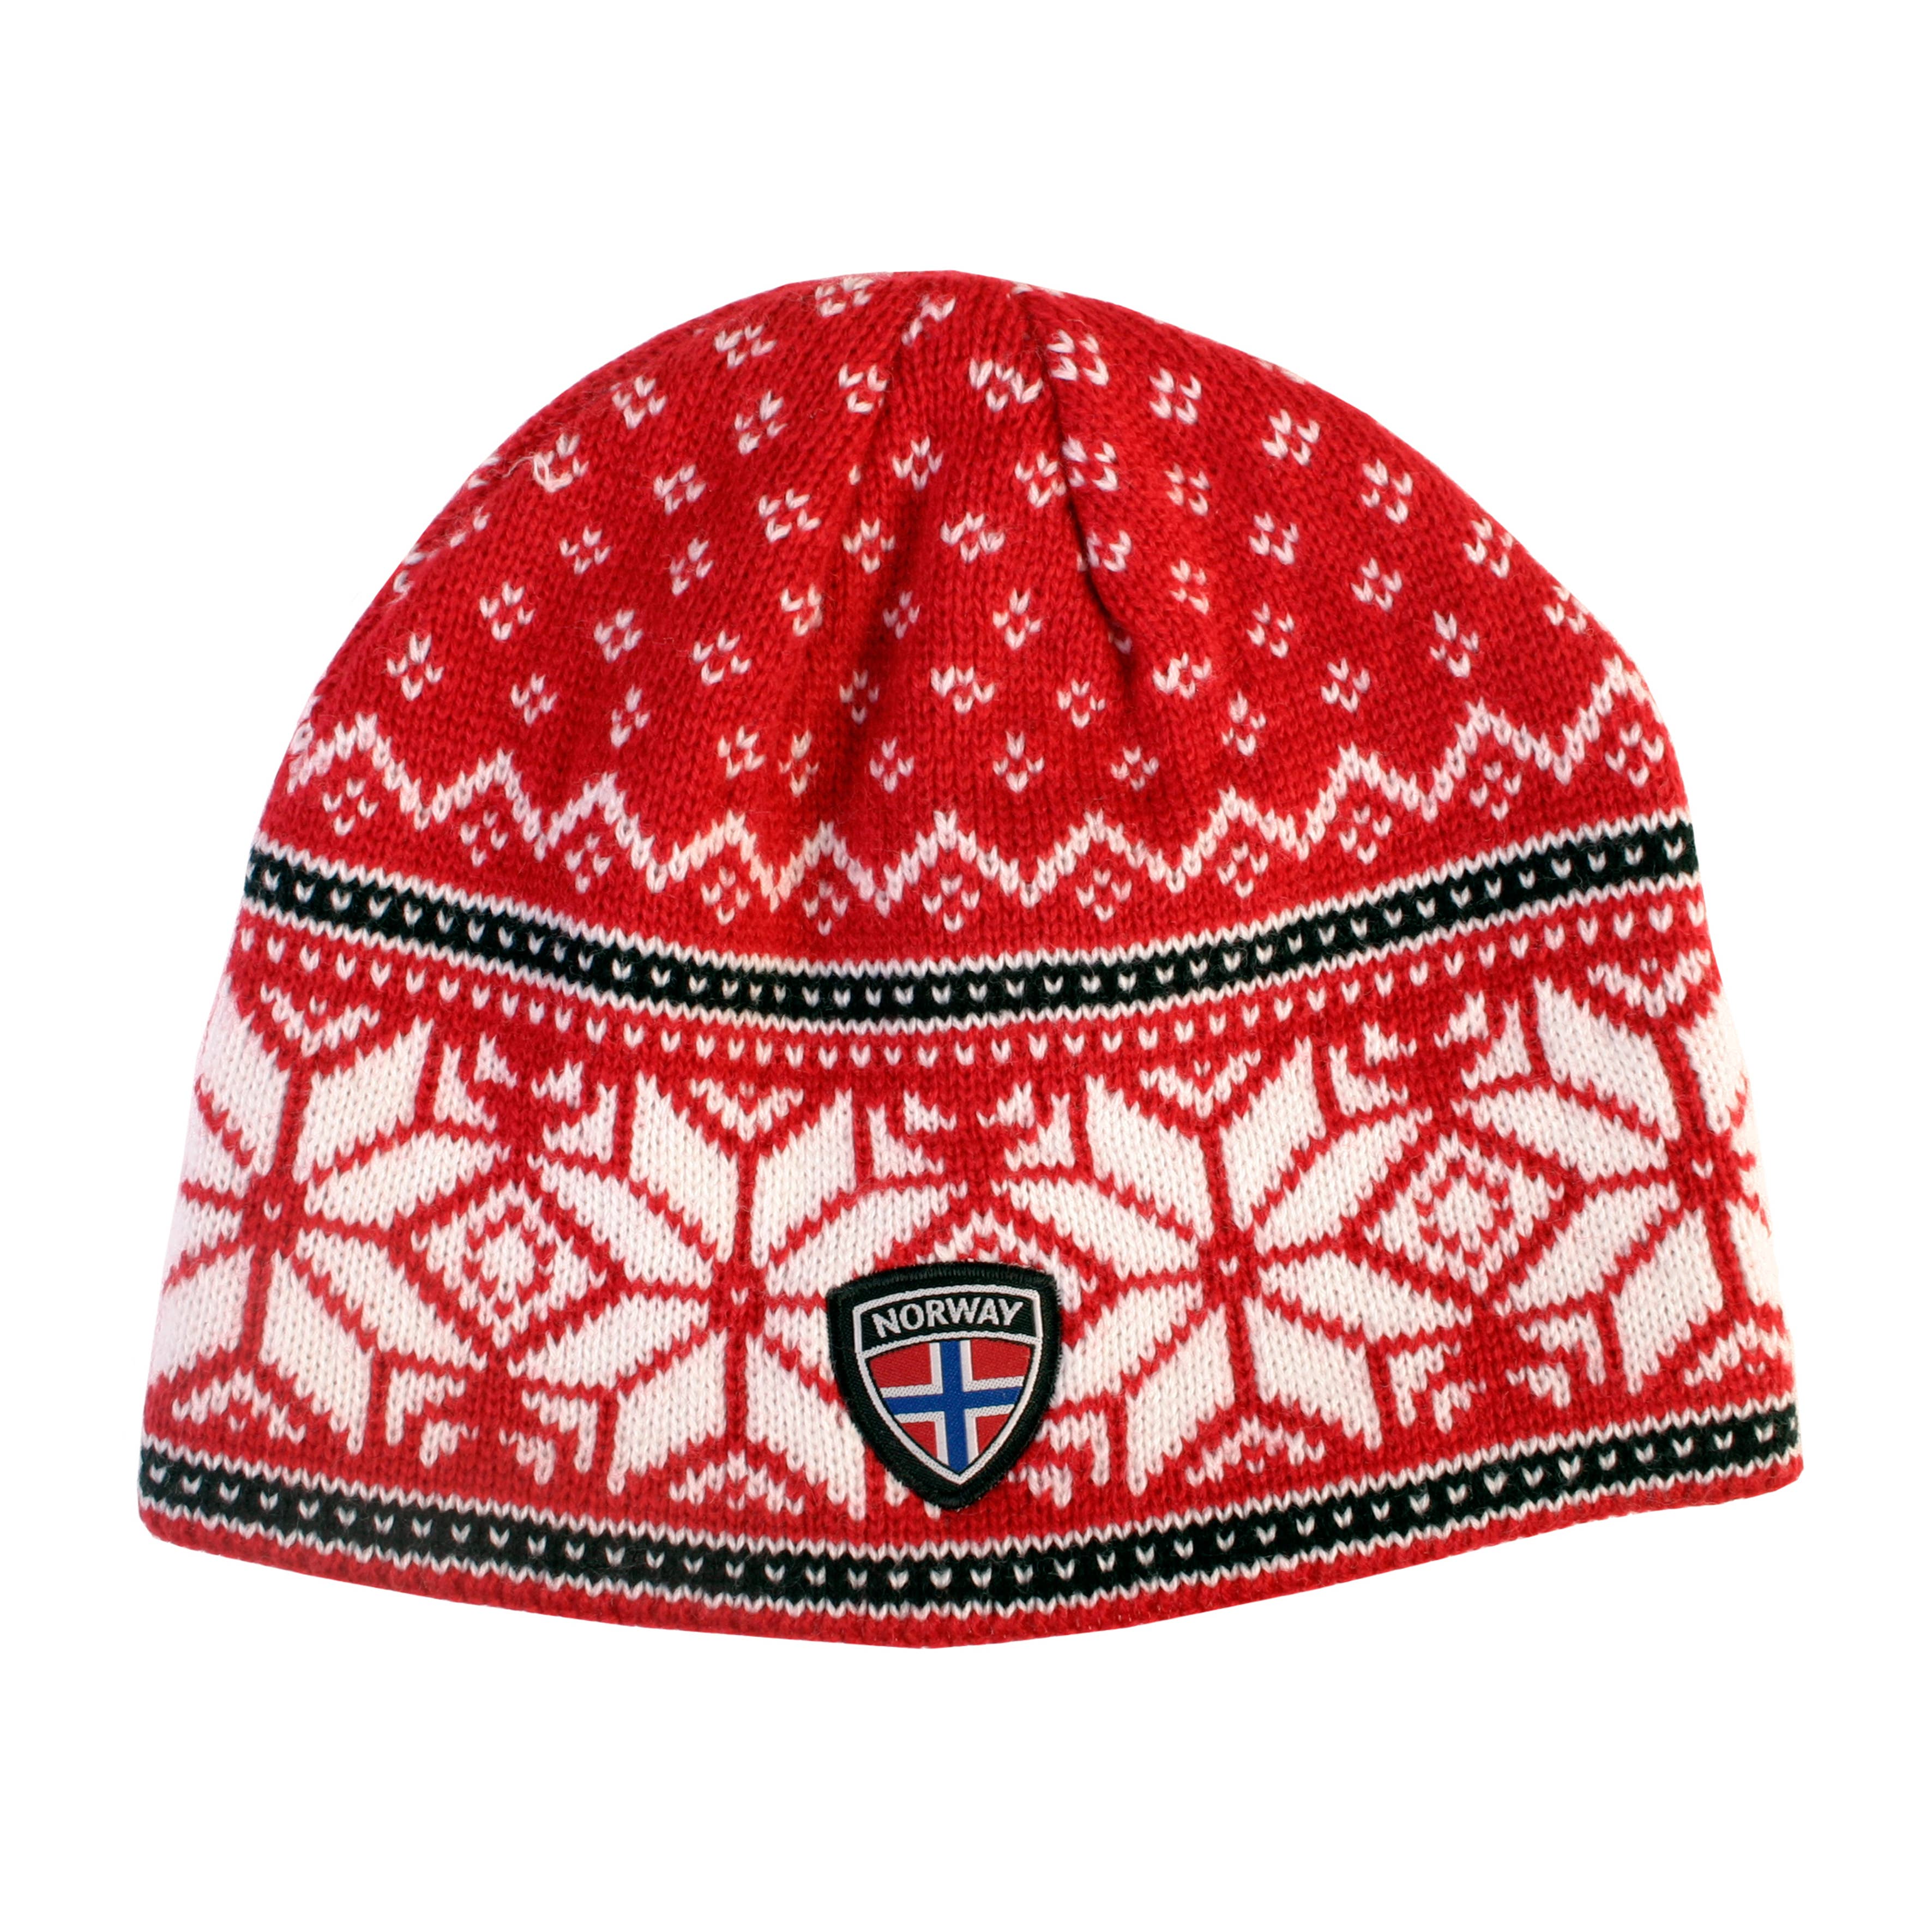 Hat: Norway Flag - Knit Hat - Red - White Stars - Unisex Size